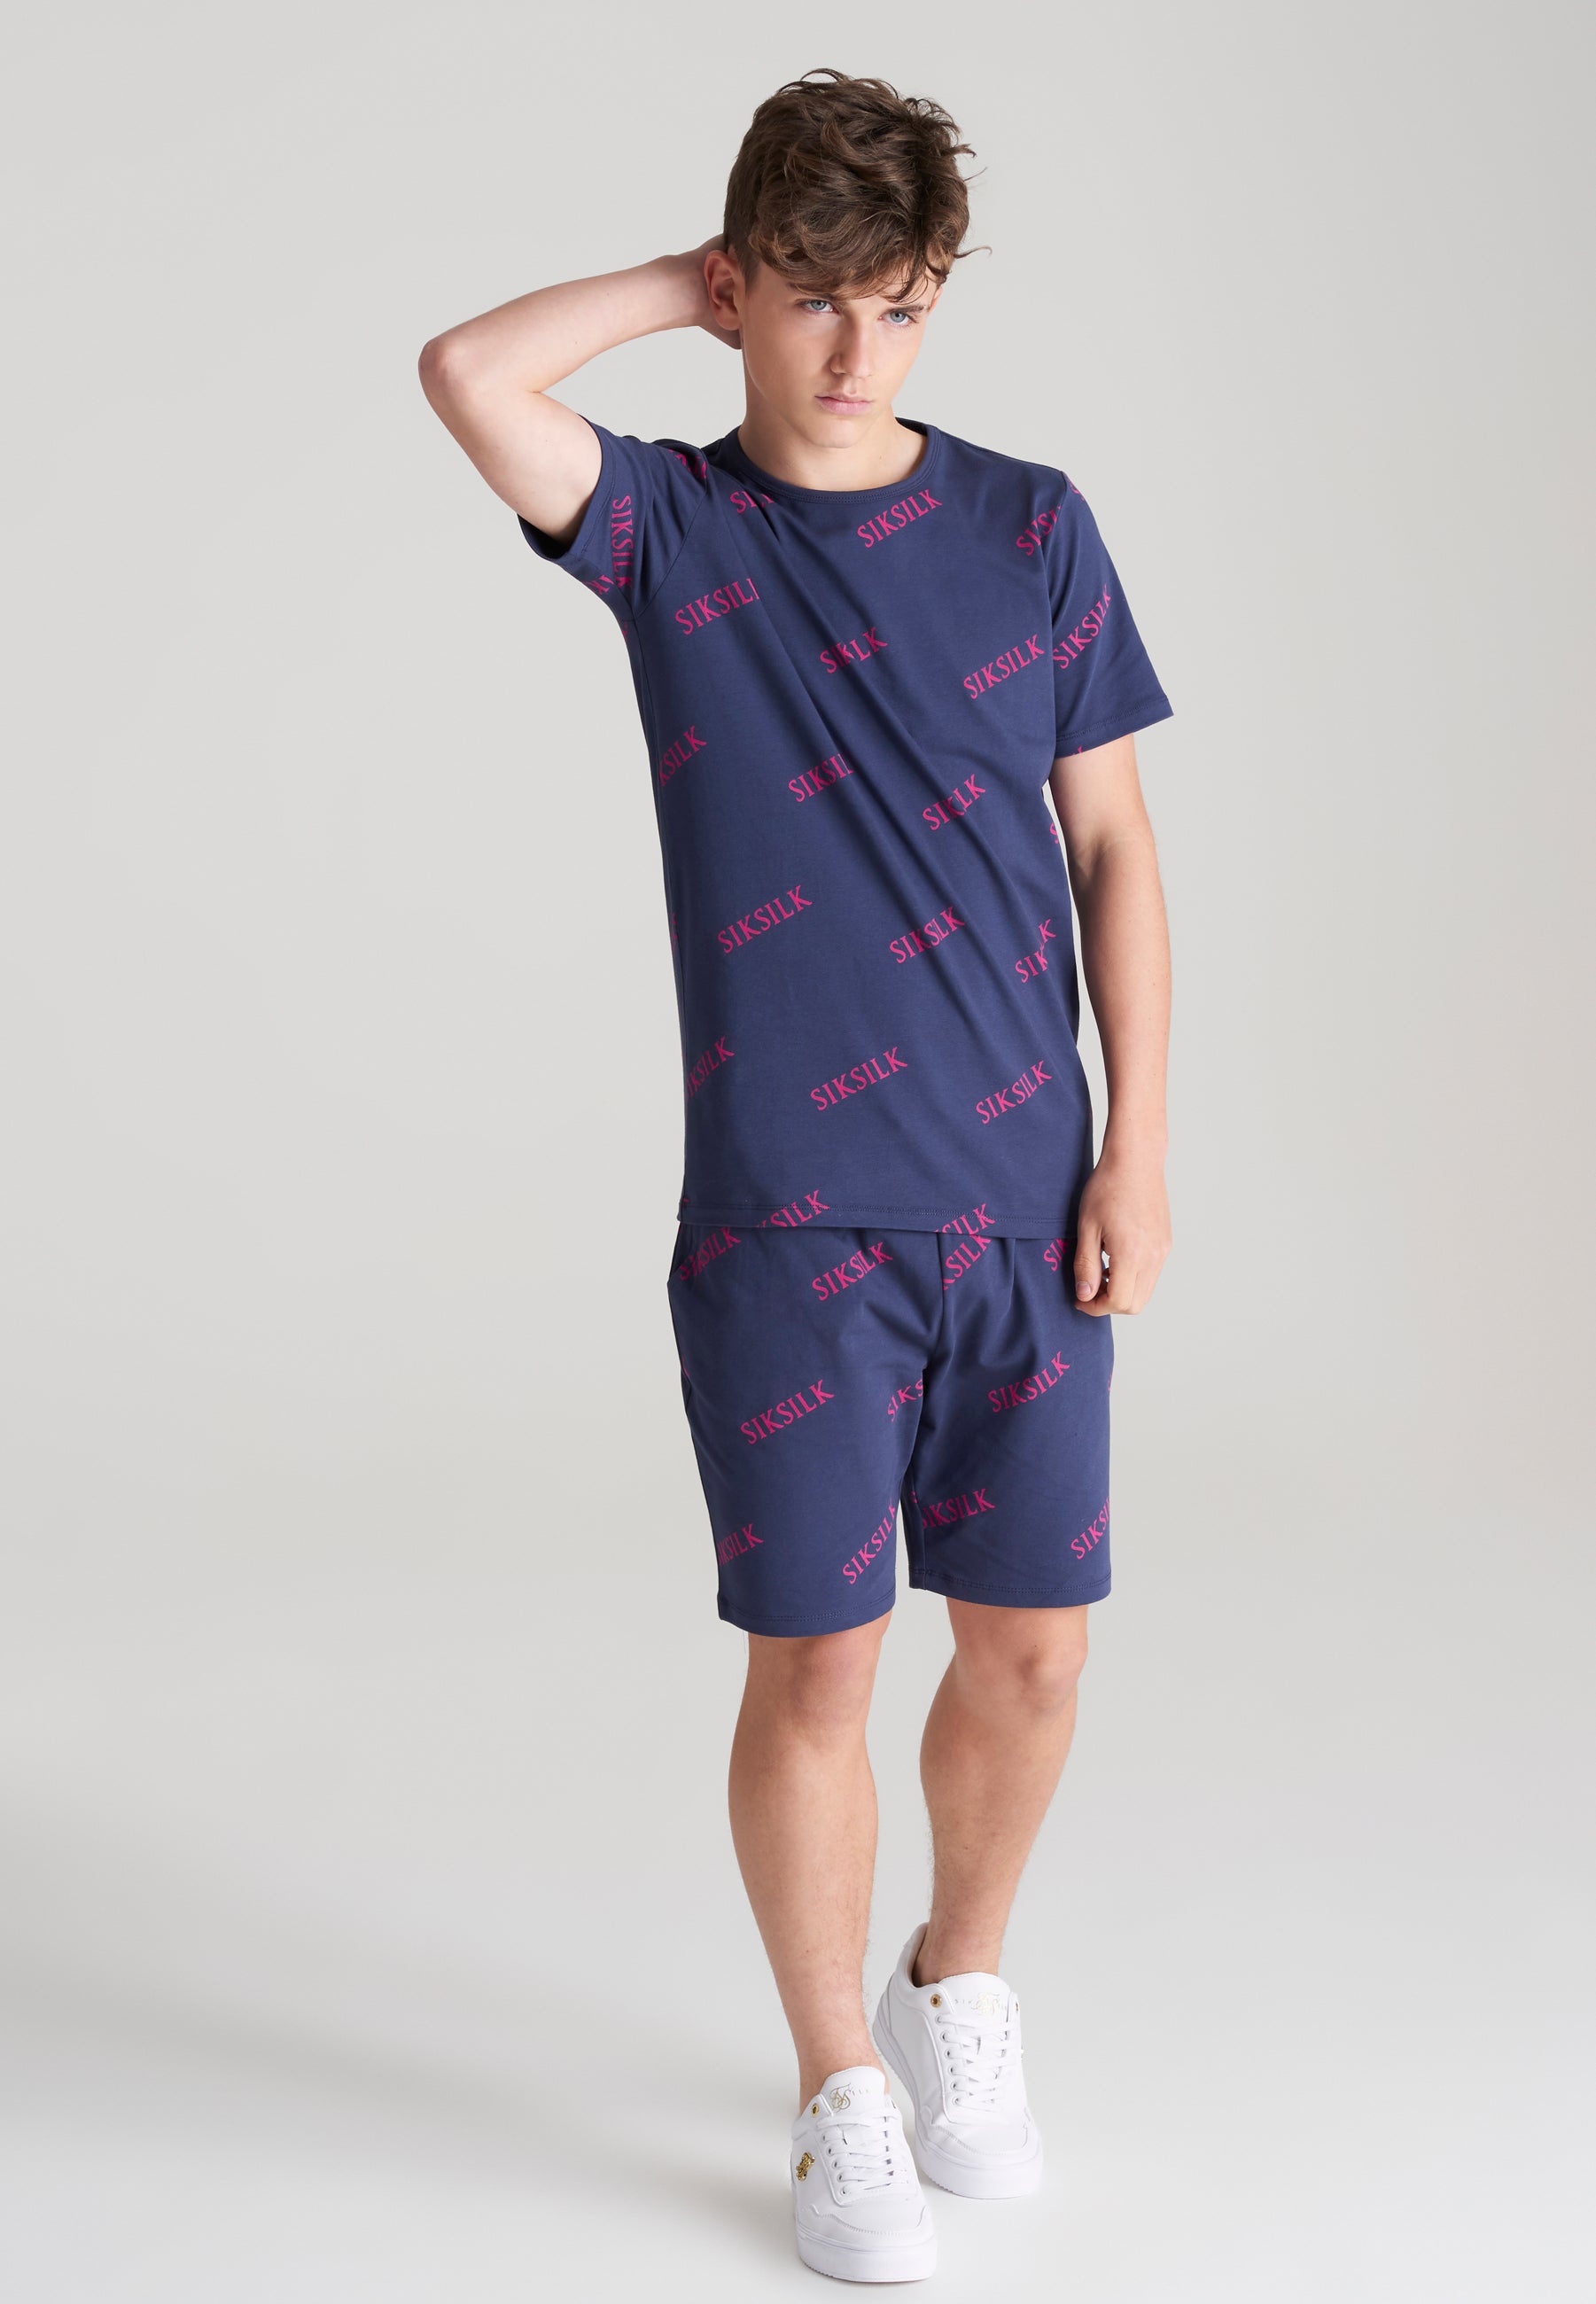 Load image into Gallery viewer, Boys Navy Monogram Printed T-Shirt (3)